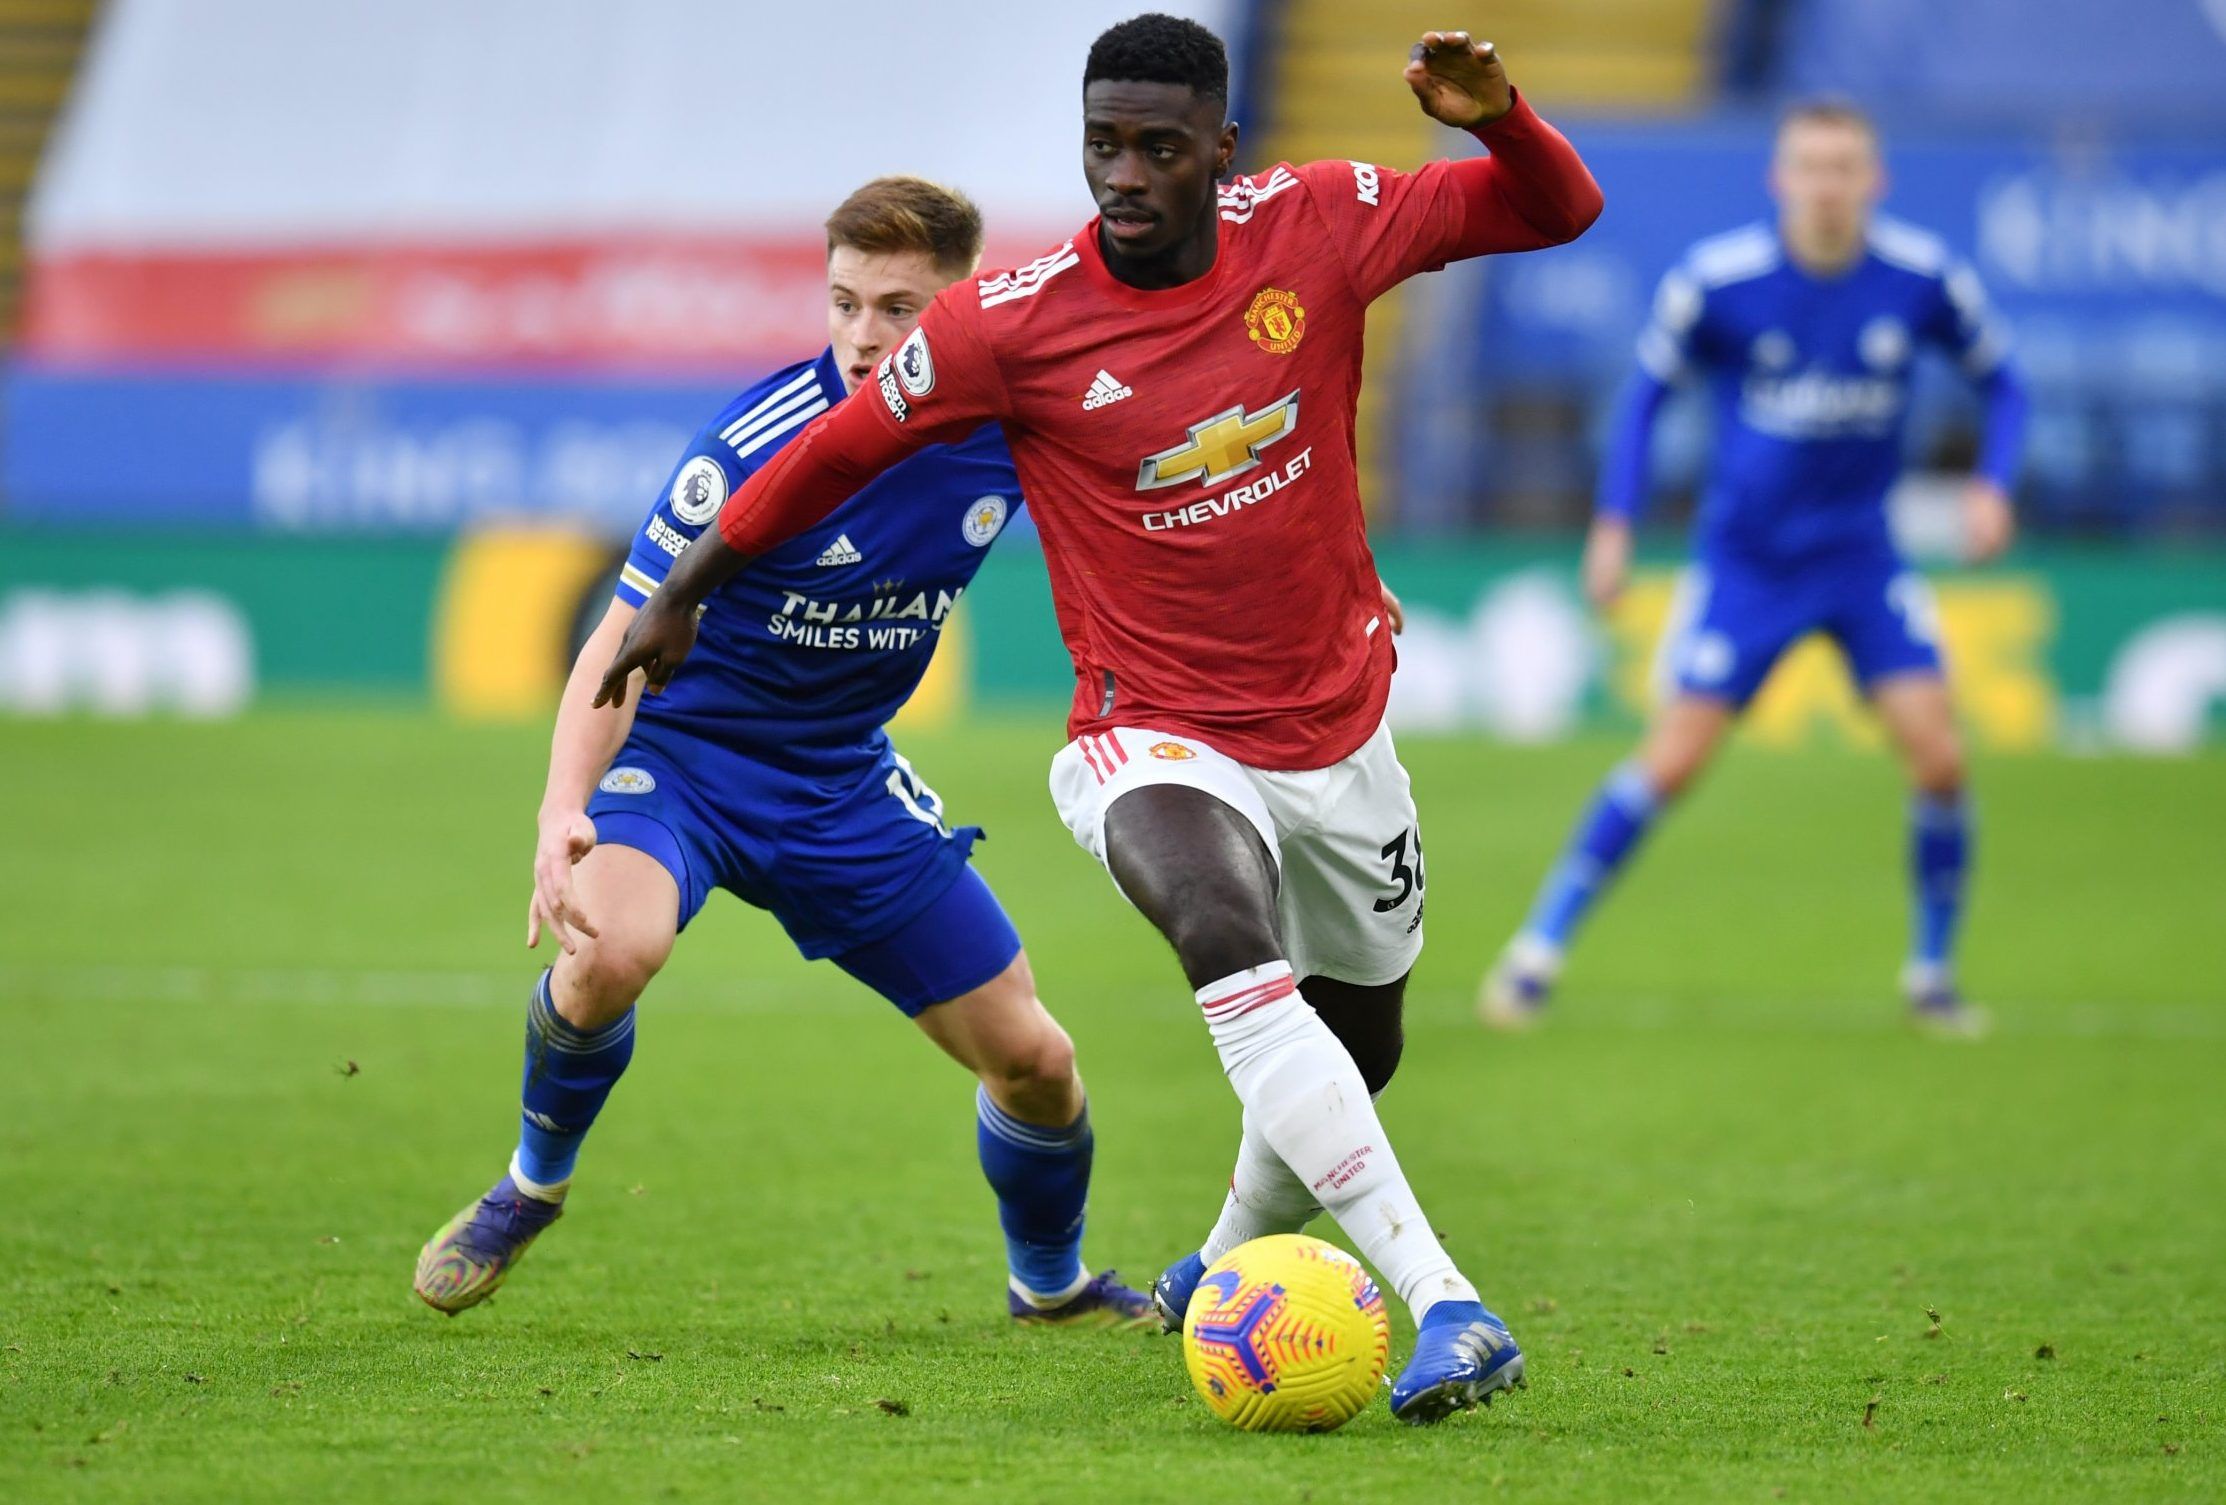 manchester united defender axel tuanzebe in action against leicester city in the premier league